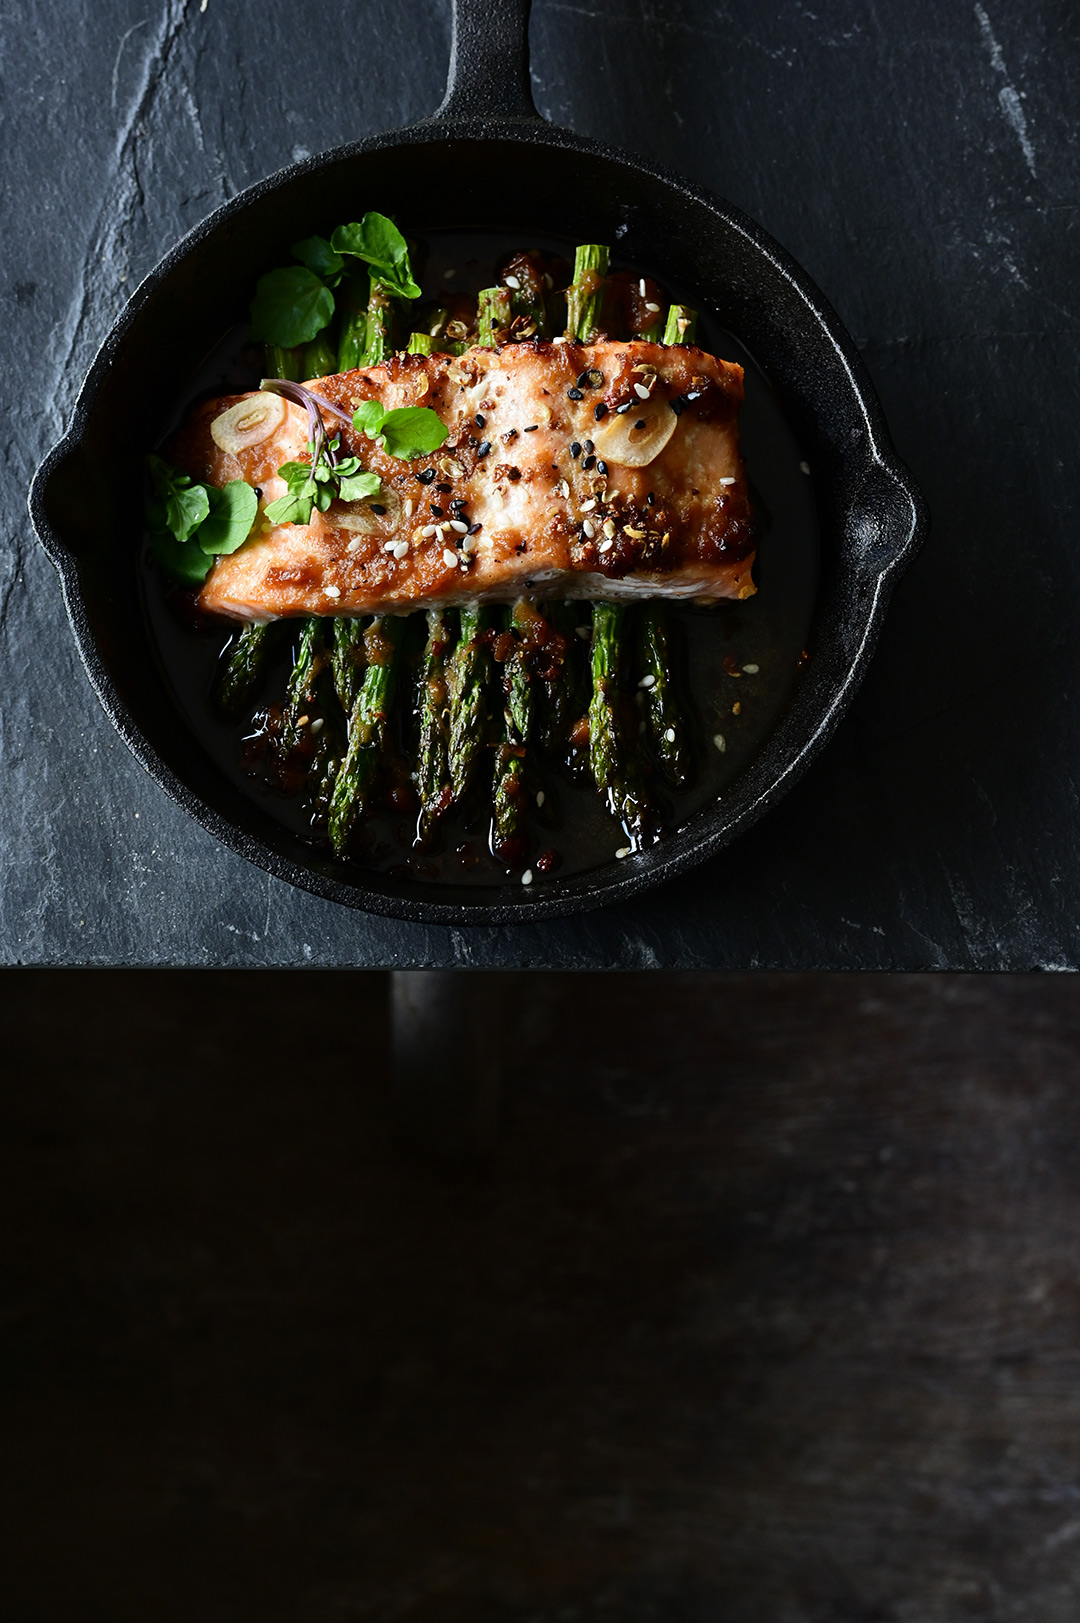 serving dumplings | Miso roasted salmon with asparagus